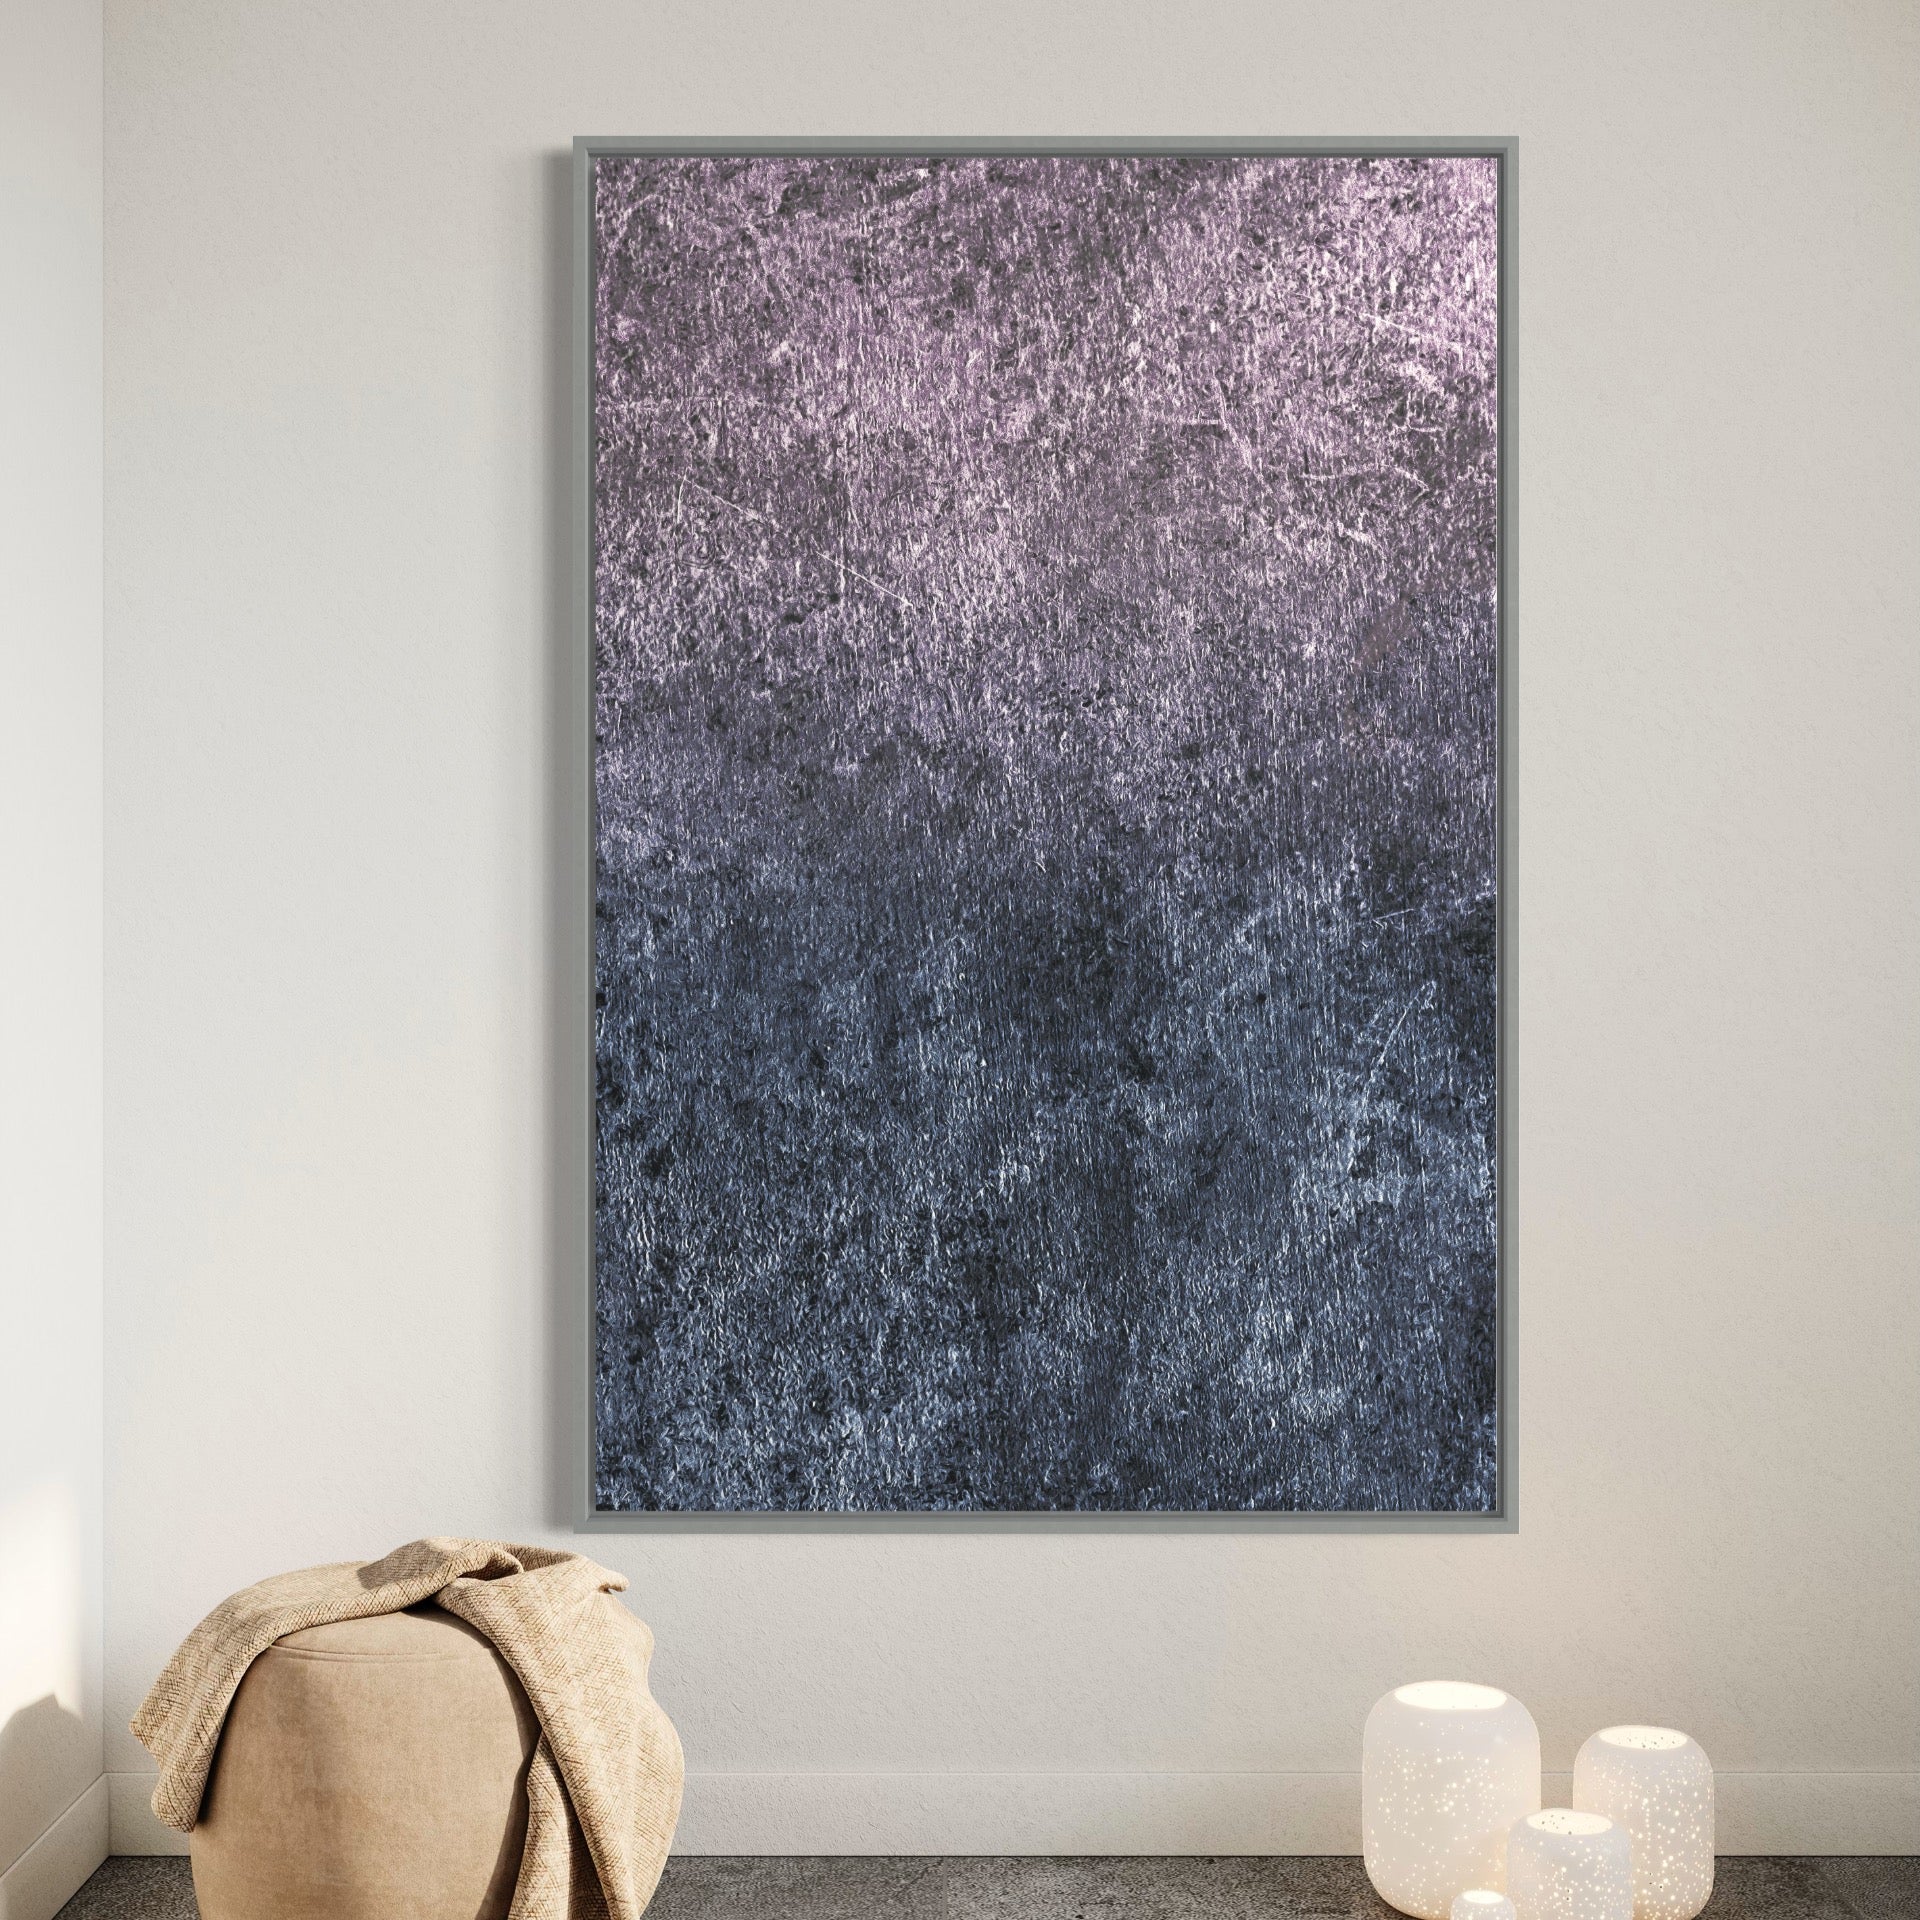 Work 046, Black And Silver / 80x120cm